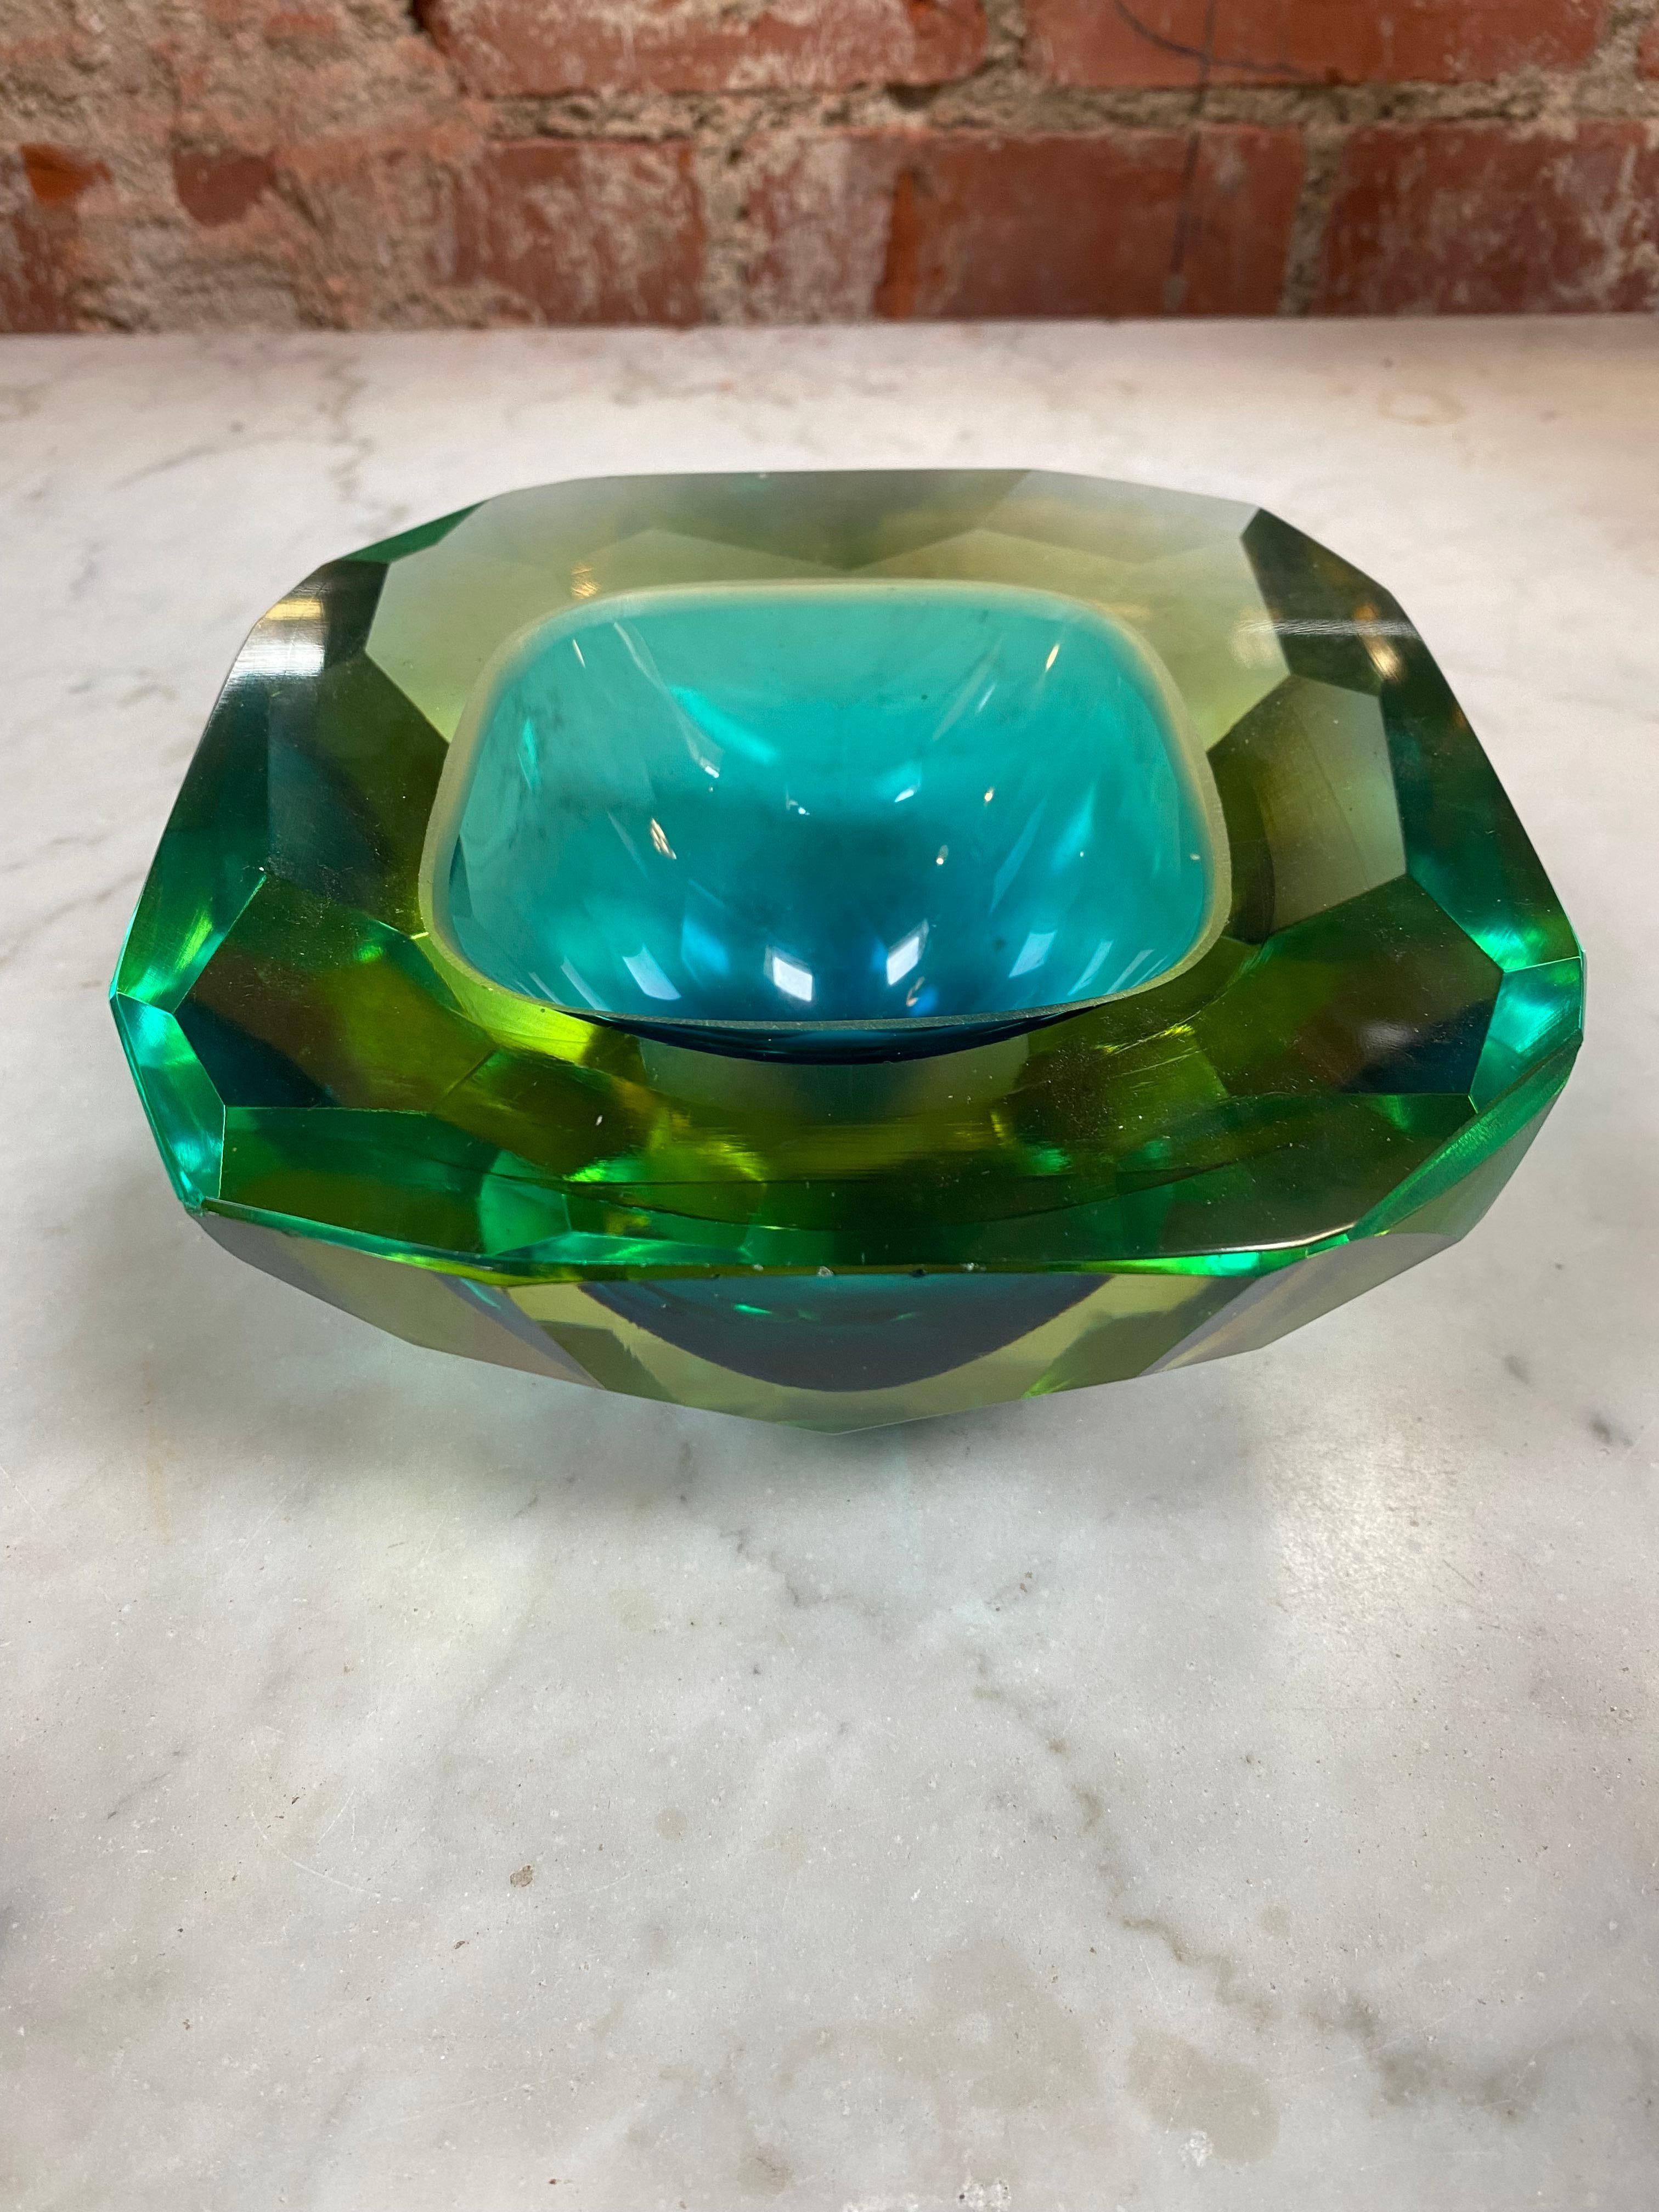 Beautiful Italian Decorative crystal bowl in heavy quality and a striking, poisonous green color. Dramatic design with a play of light in the thick glass.
 